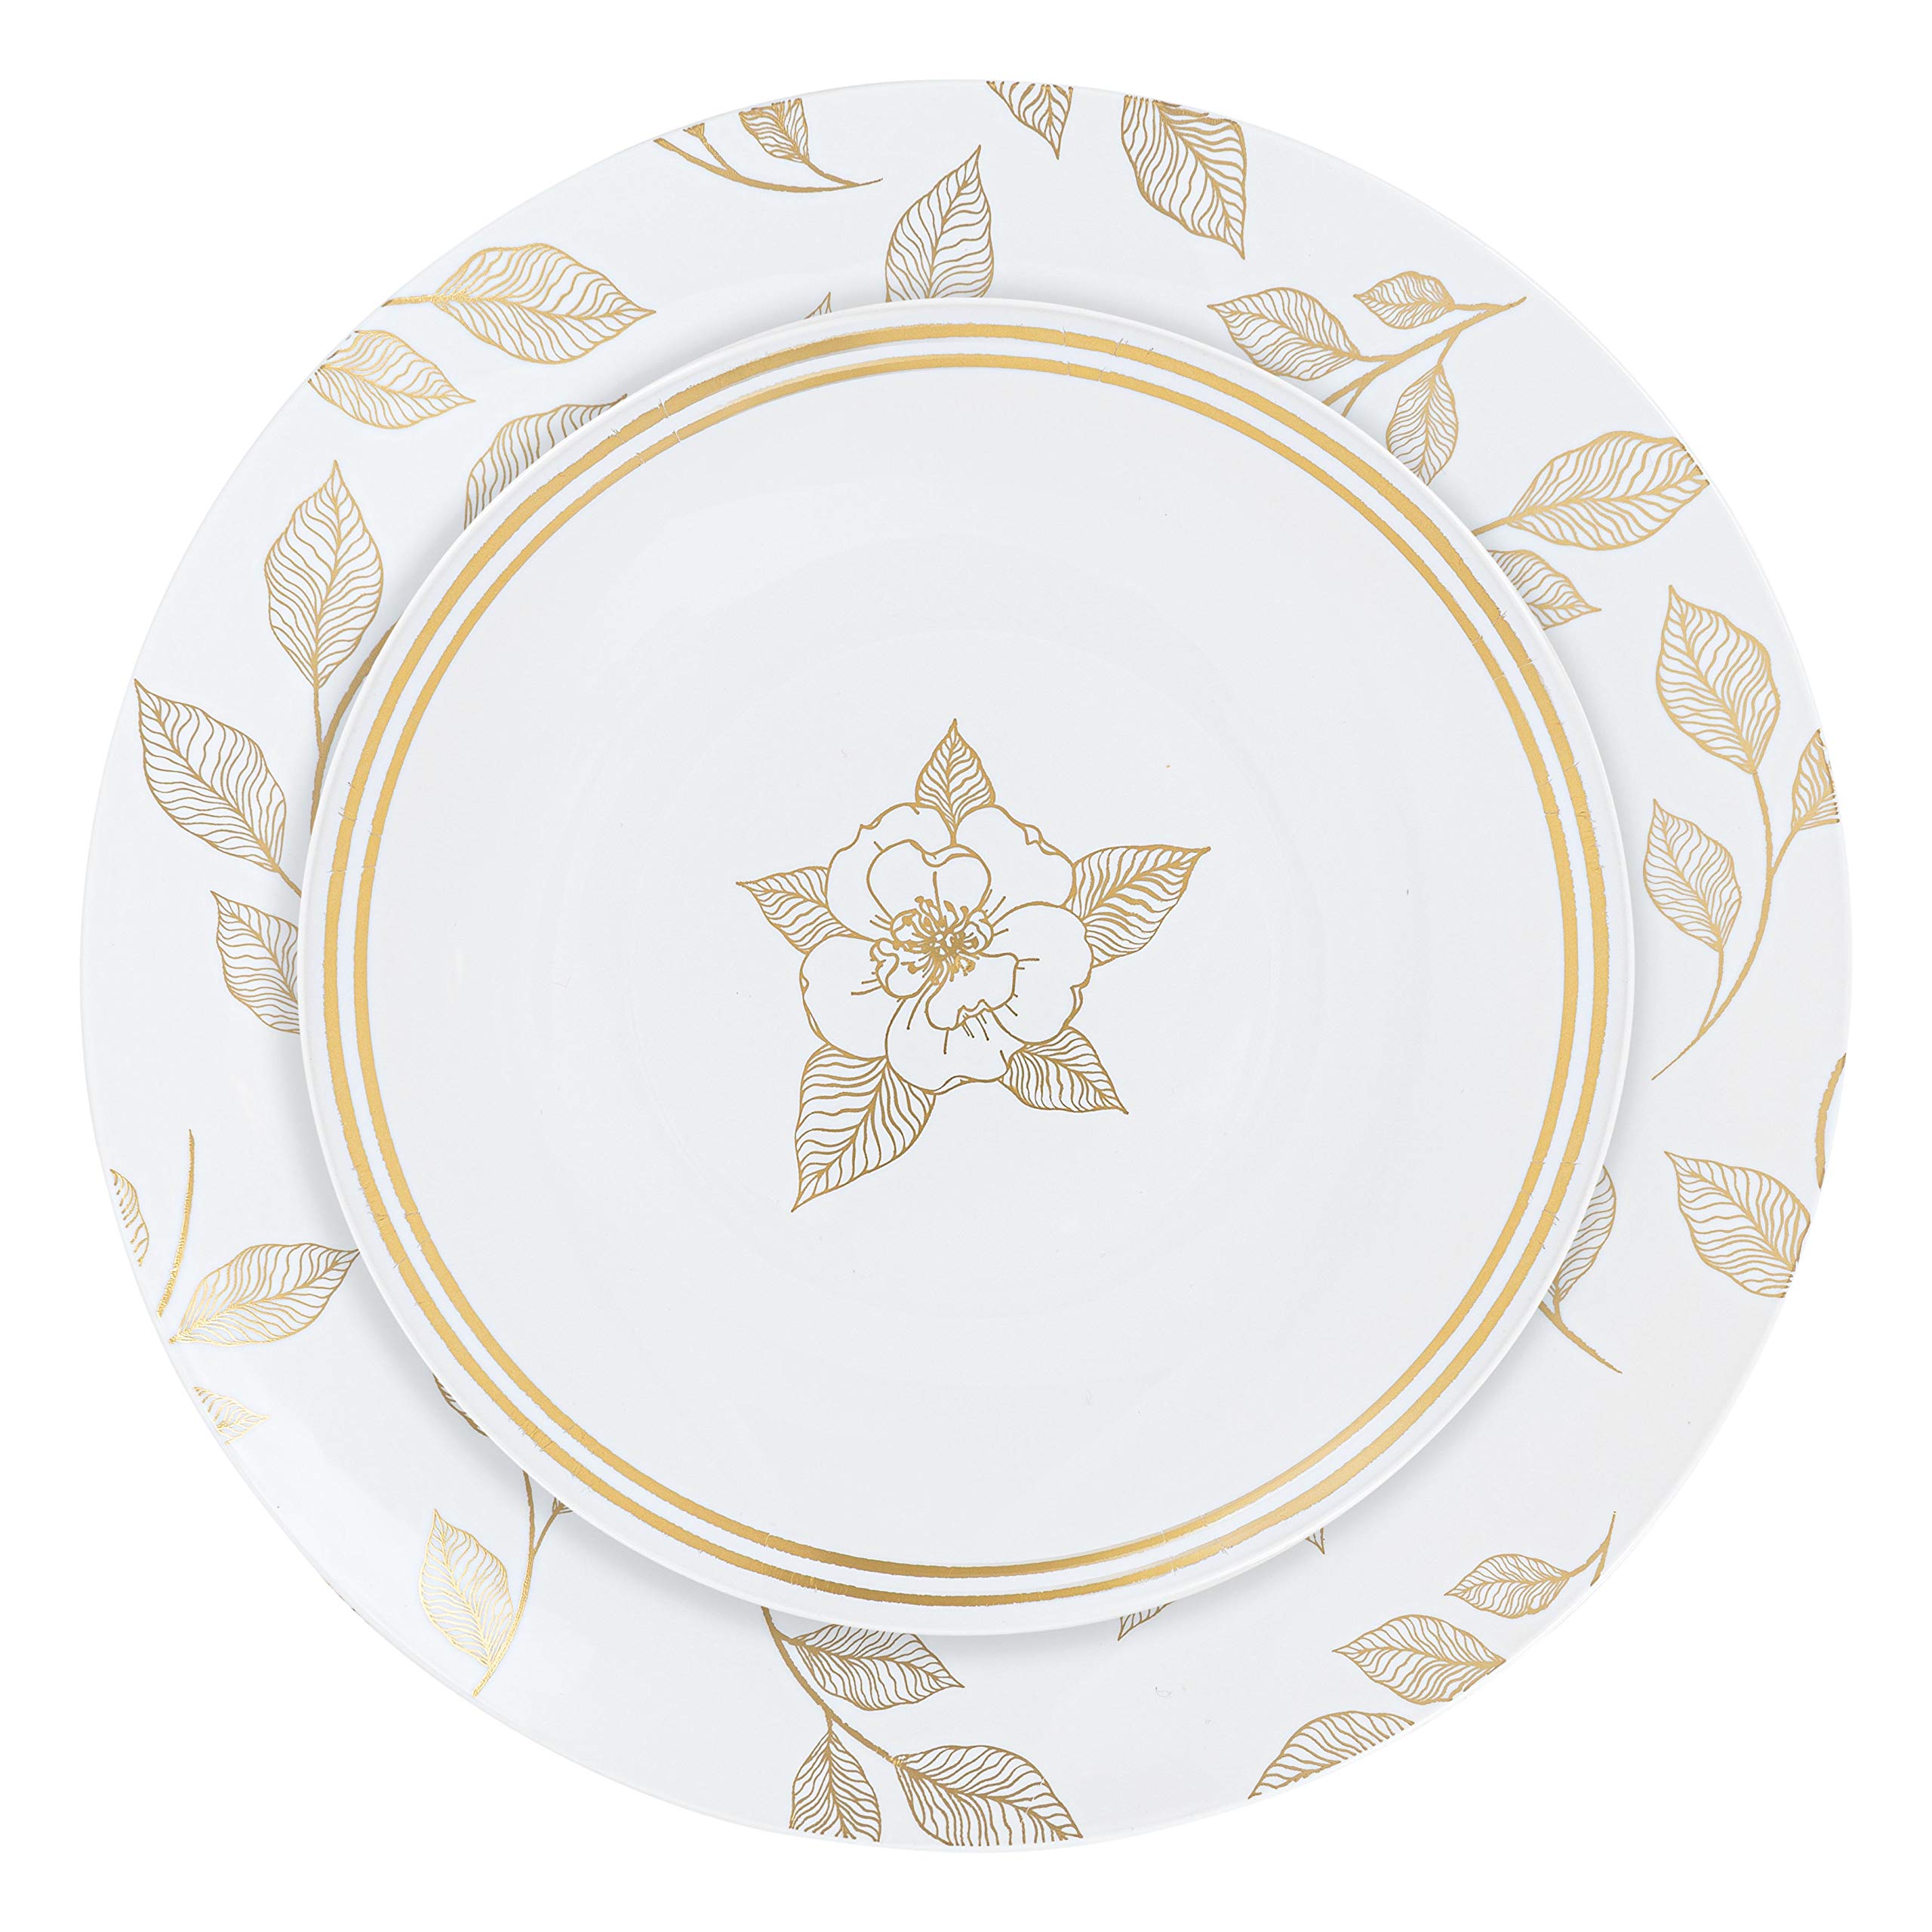 Plasticpro 64 Piece Combo Plate Set includes 32 7'' inch Plates & 32 10'' inch Plates White Plastic Botanic Floral Design Party Pla...